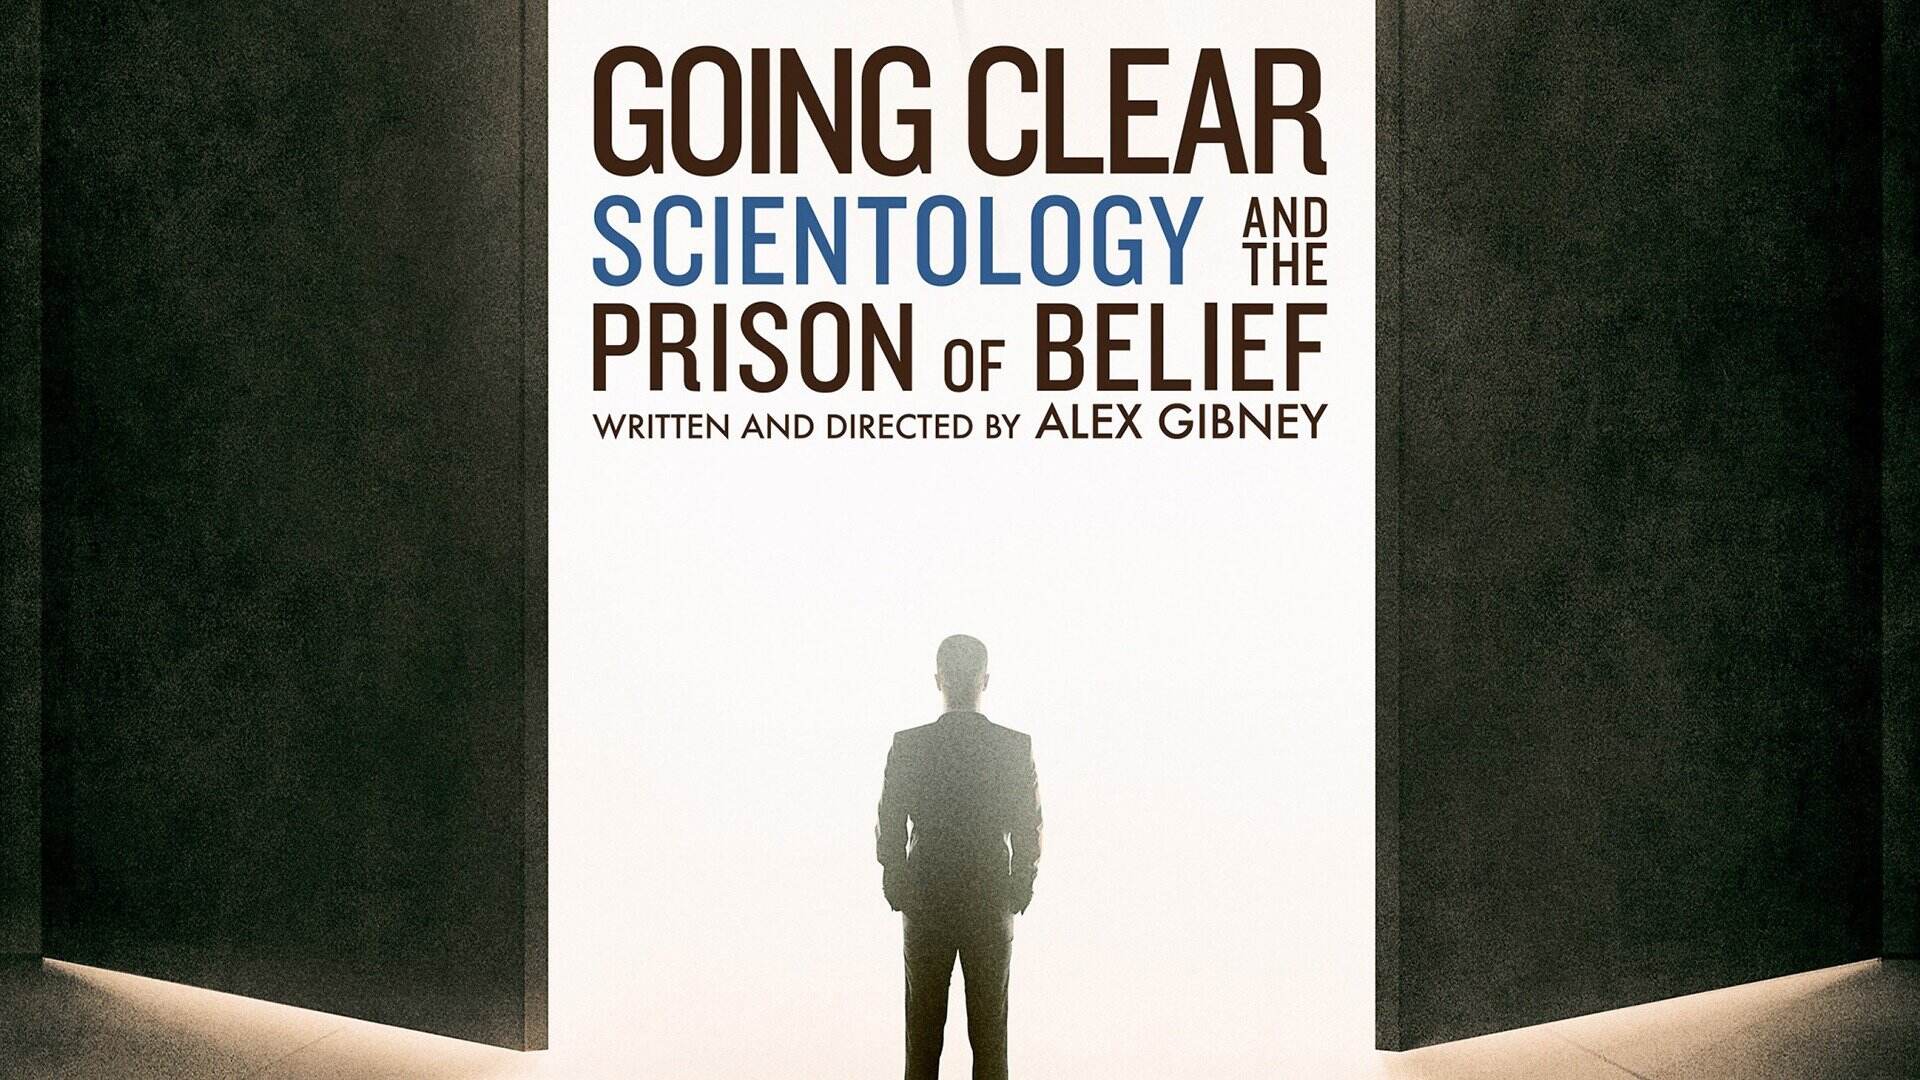 41-facts-about-the-movie-going-clear-scientology-and-the-prison-of-belief